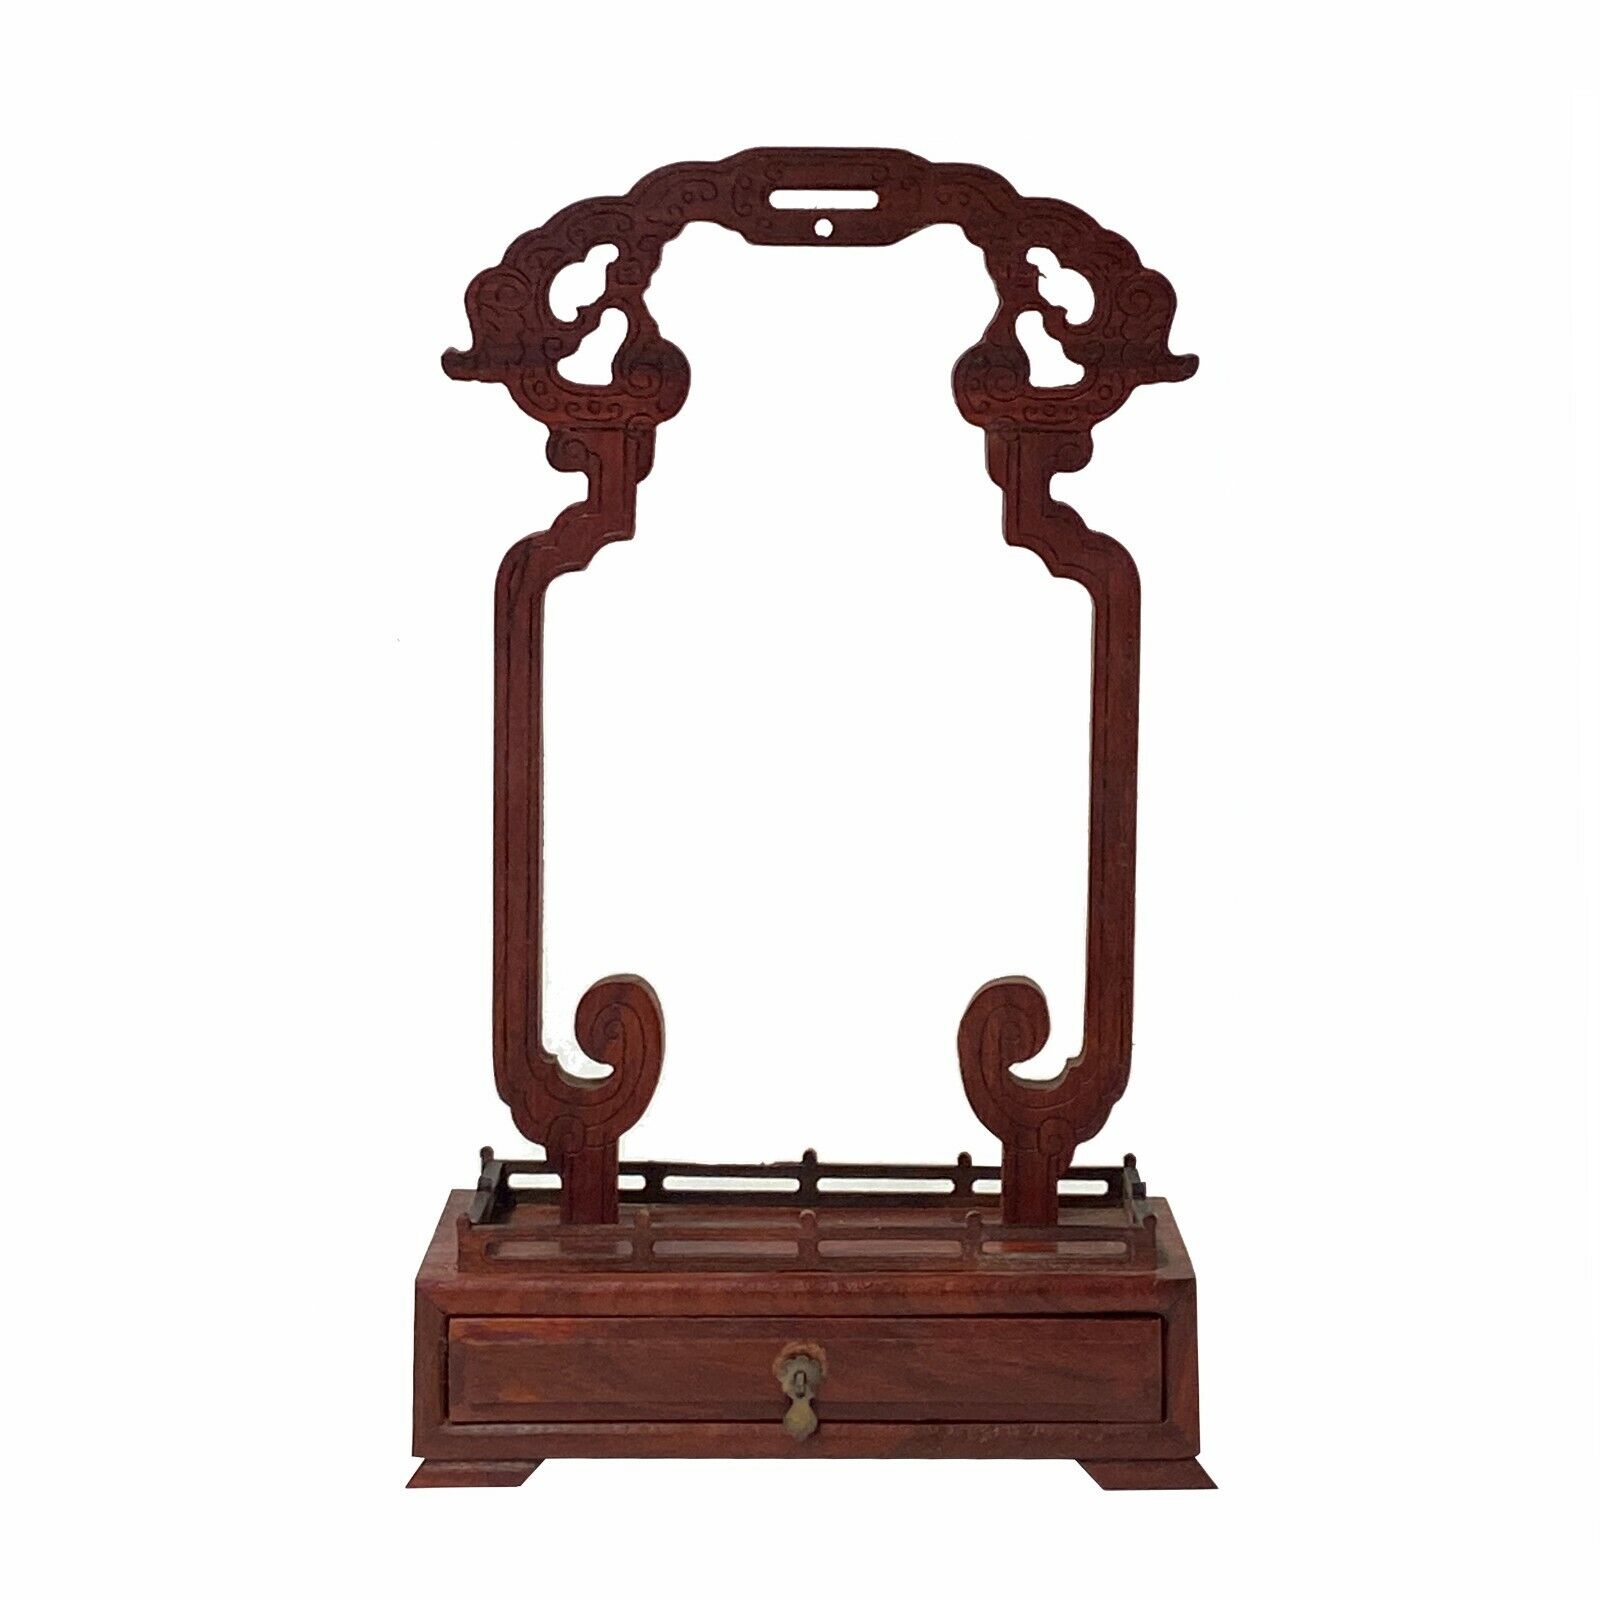 Chinese Rosewood RuYi Hanging Ring Display Stand - Miniature Easel ws1571